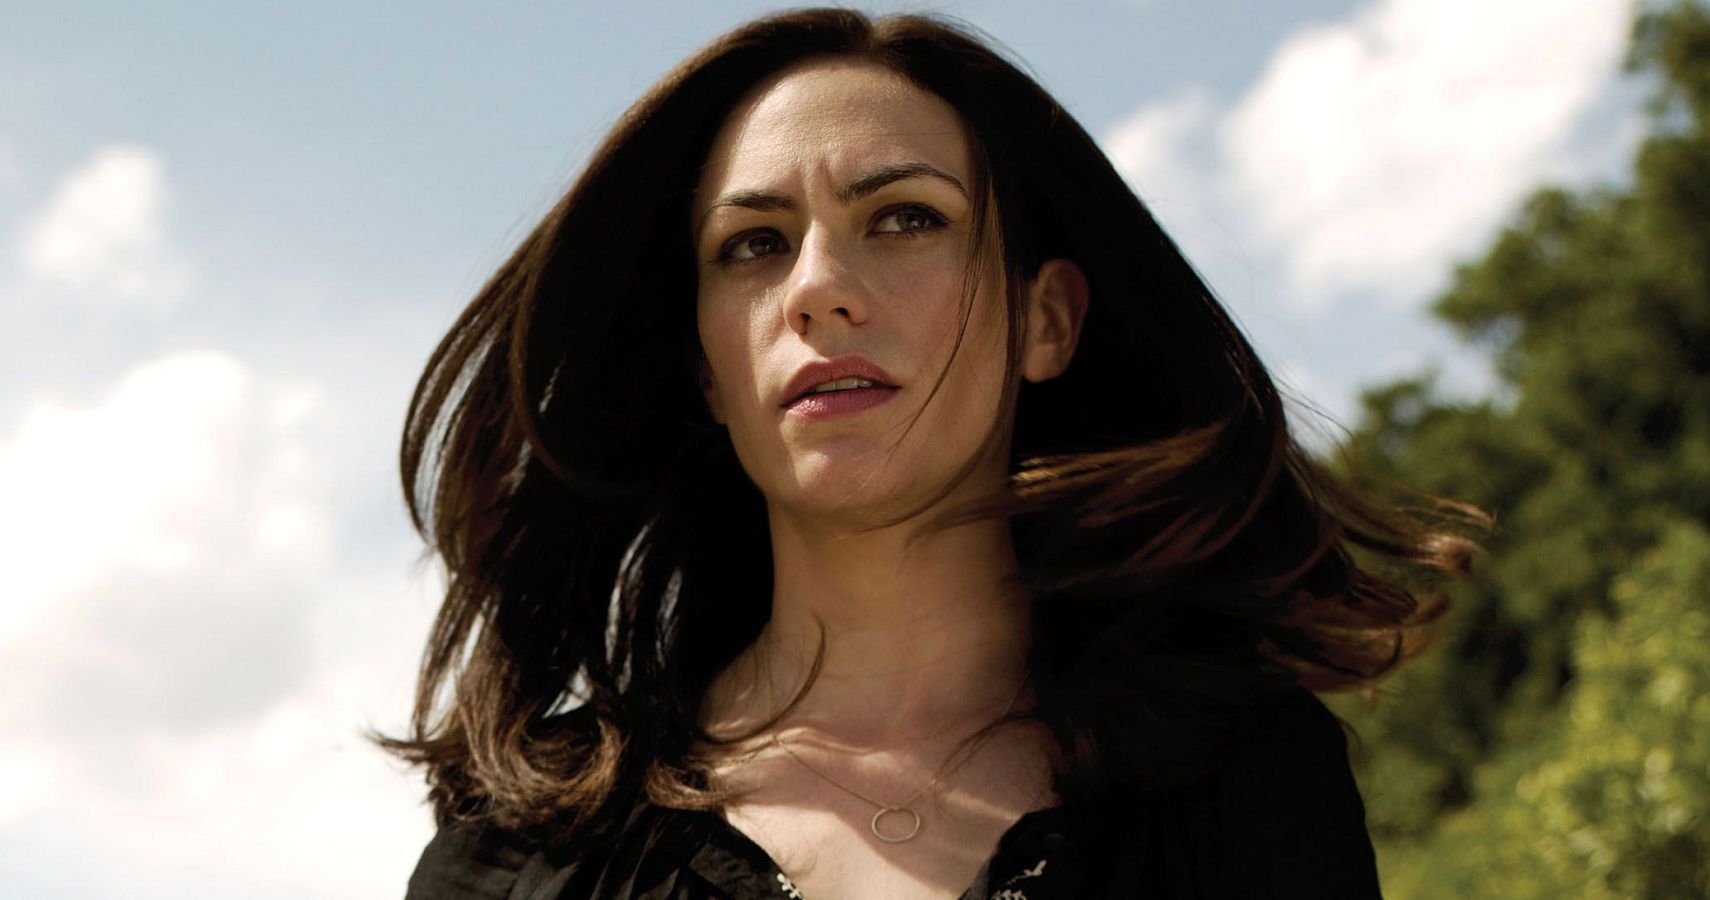 Sons Of Anarchy: 10 People Tara Should Have been With ( Other Than Jax)